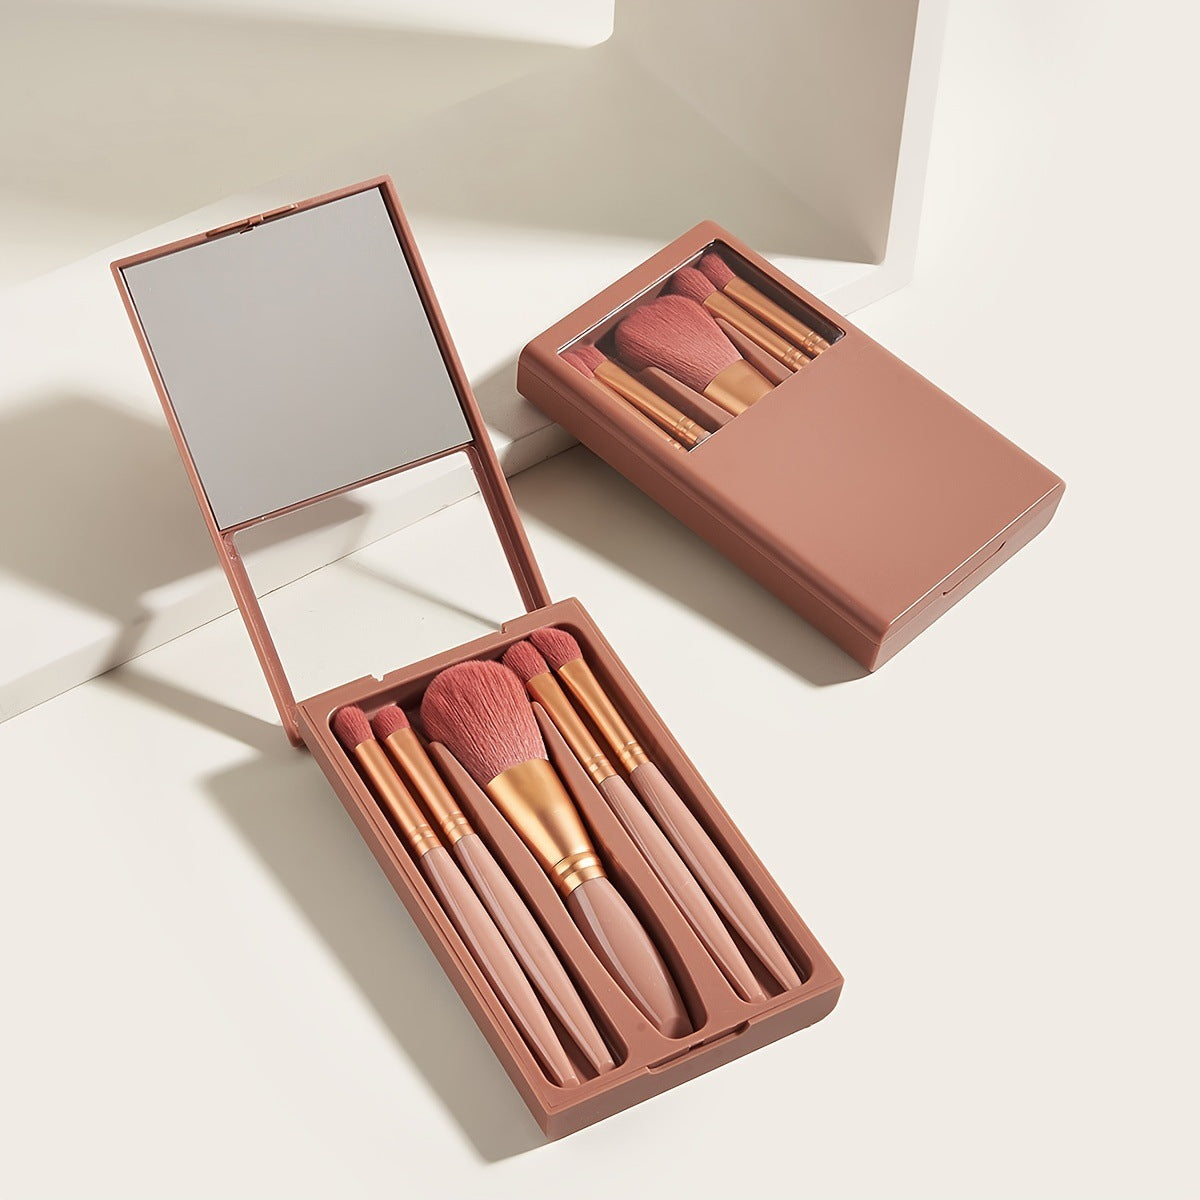 5-Piece Travel Makeup Brushes with Mirror Set: Portable Beauty On-the-Go LA ROSE BEAUTY